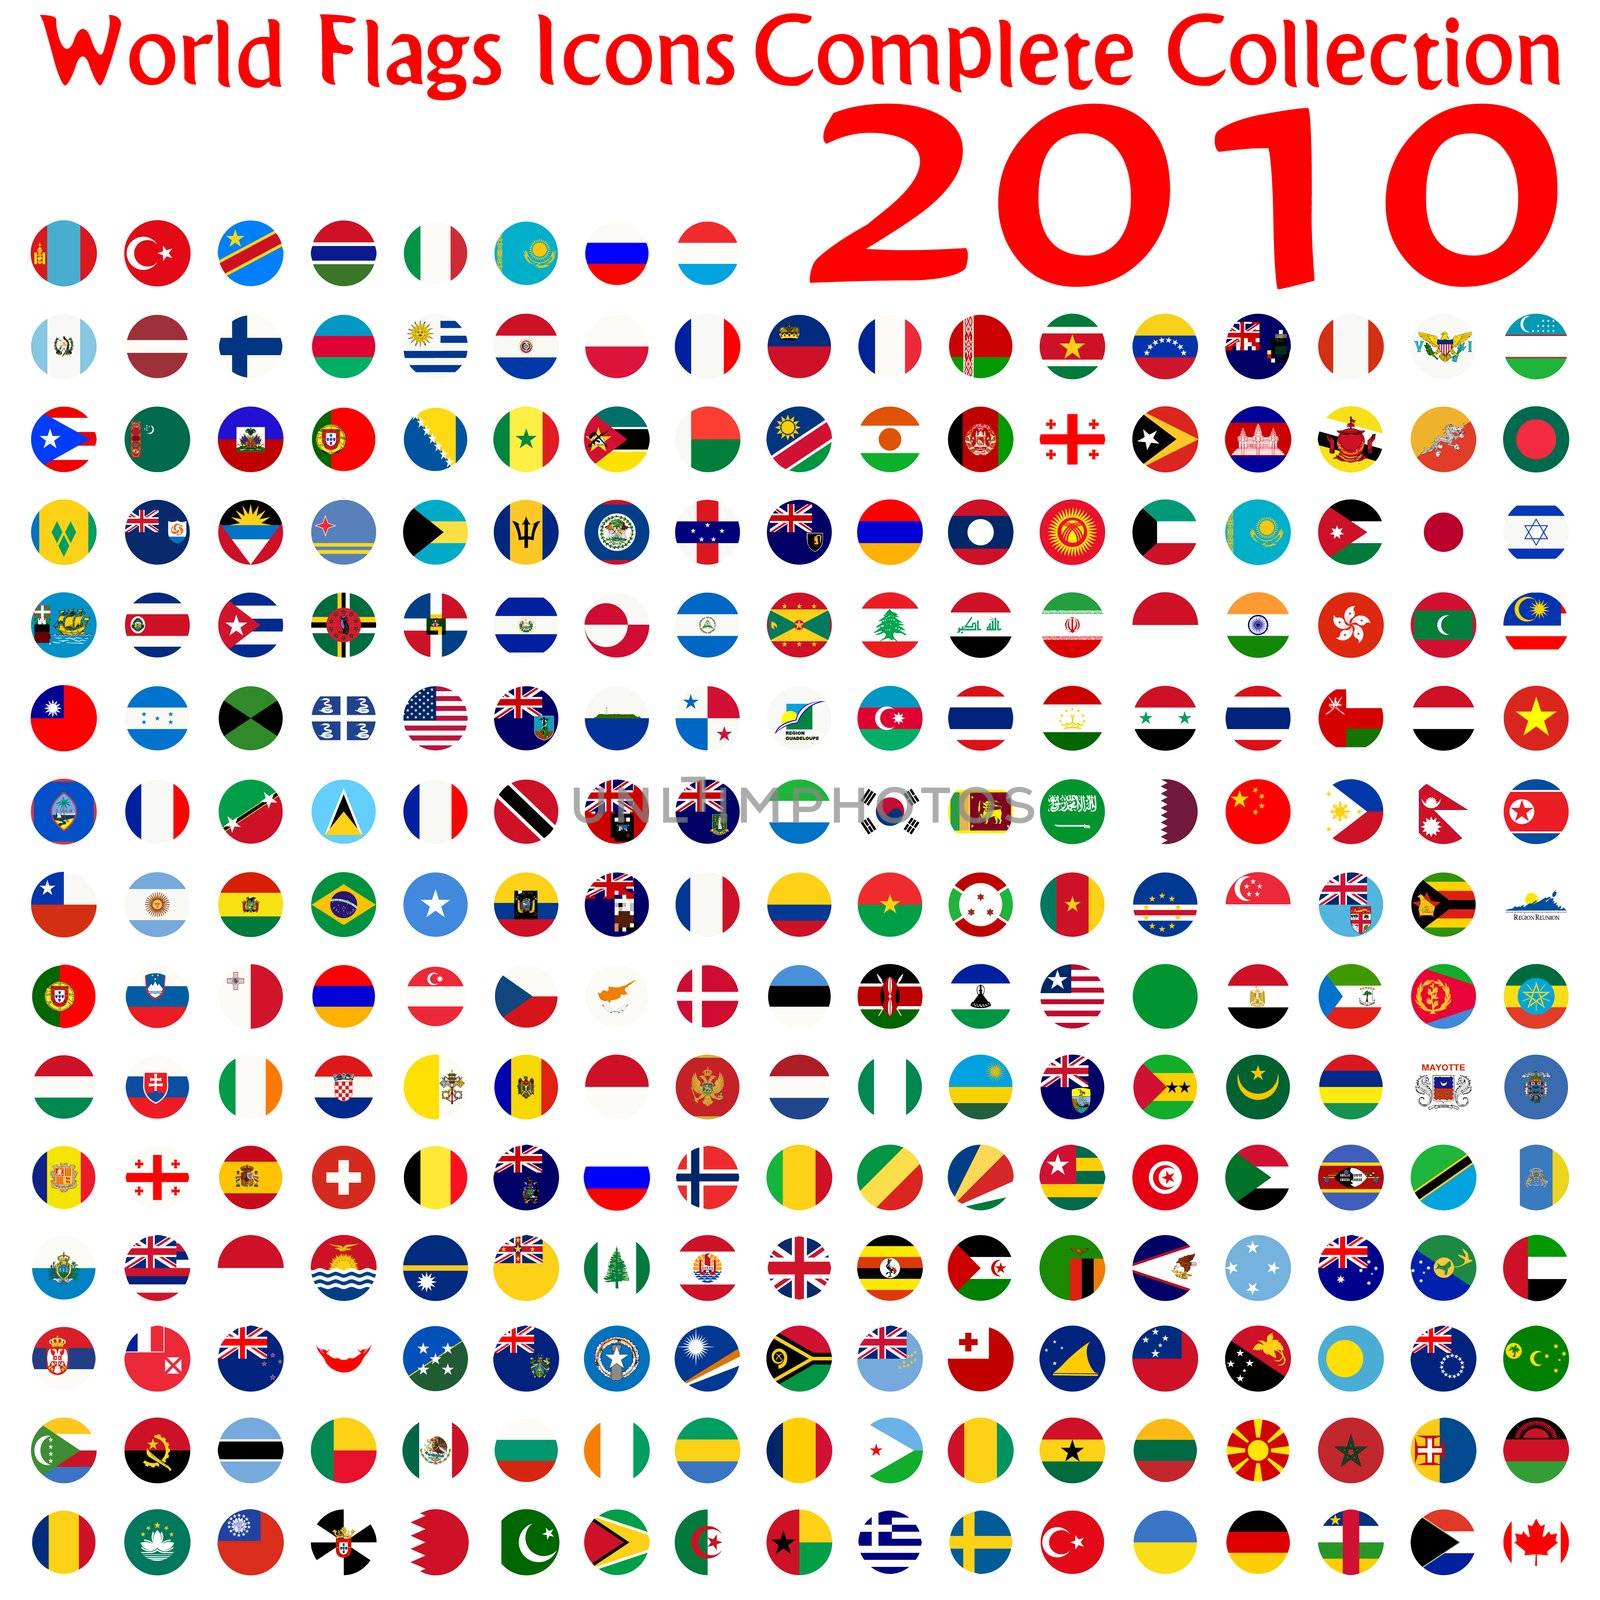 world flags icons collection, abstract vector art illustration